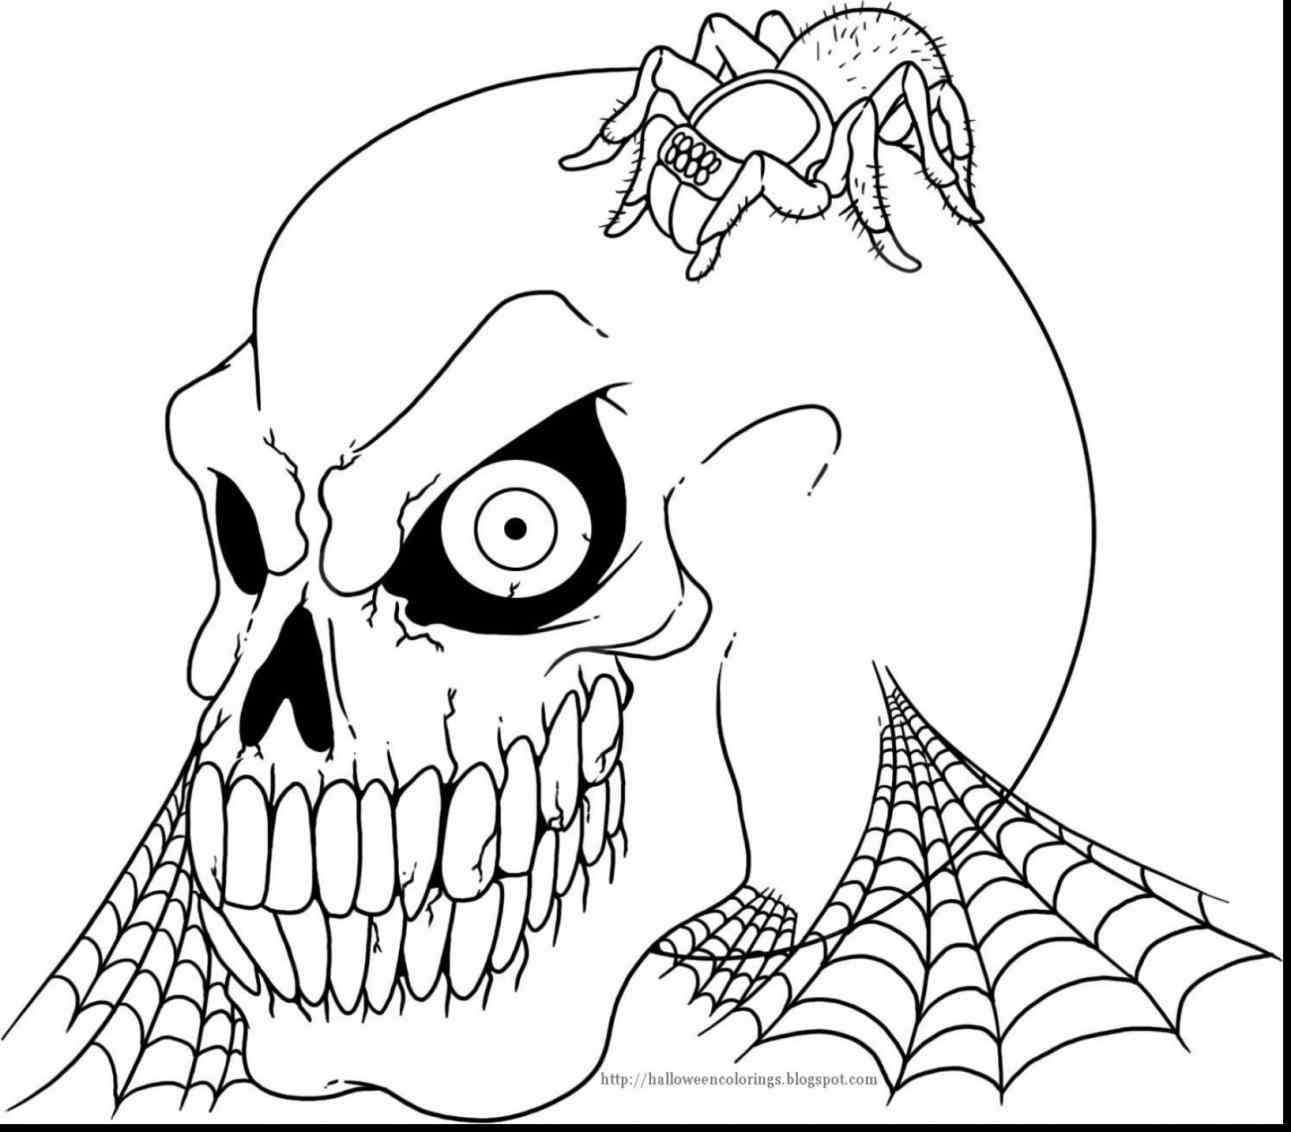 Spooky Halloween Coloring Pages at GetColorings.com | Free printable